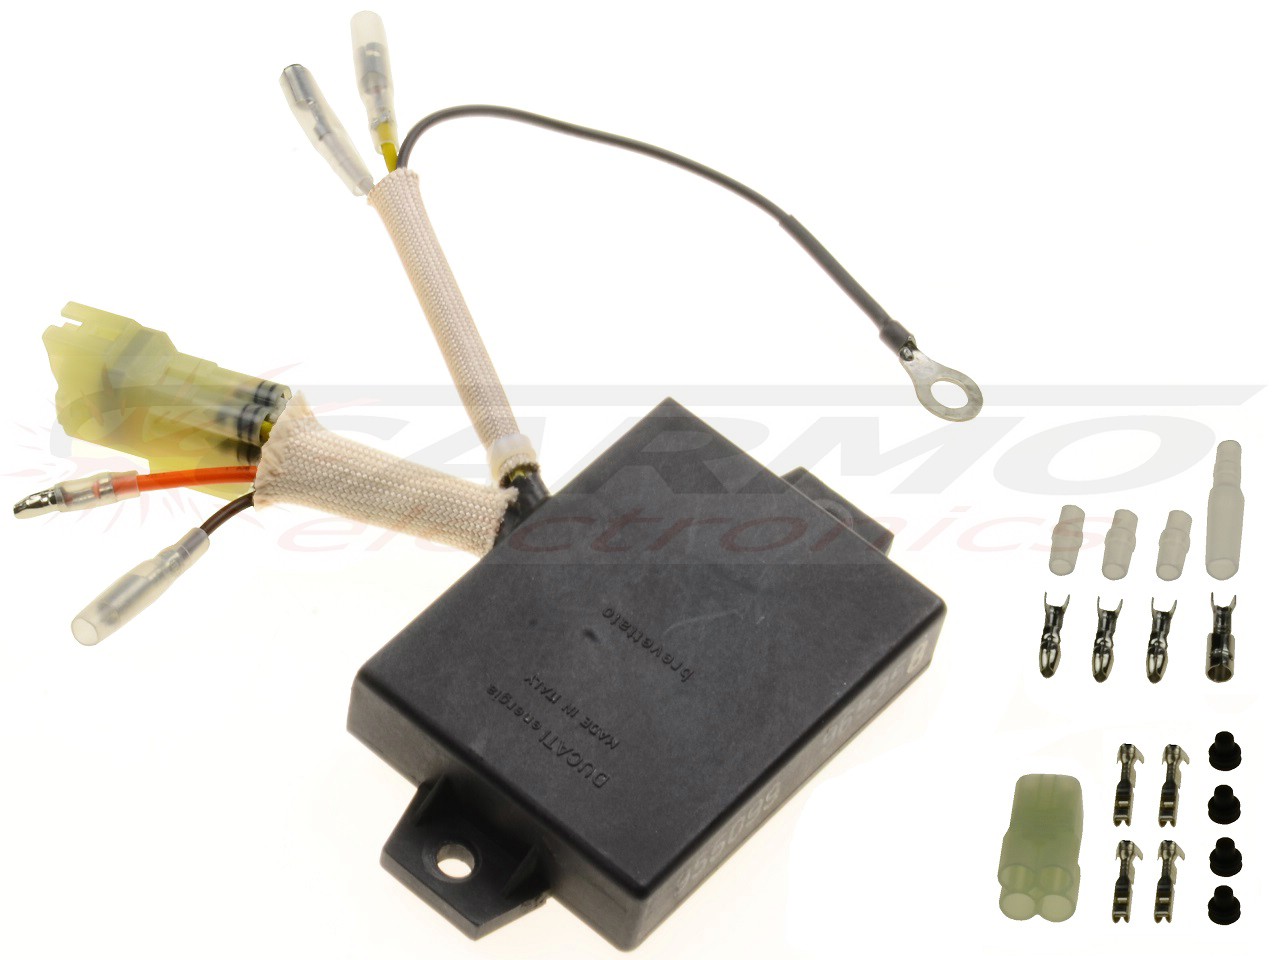 Rotax 912 CDI 965358 new wires, sleeves and connectors - Clique na Imagem para Fechar